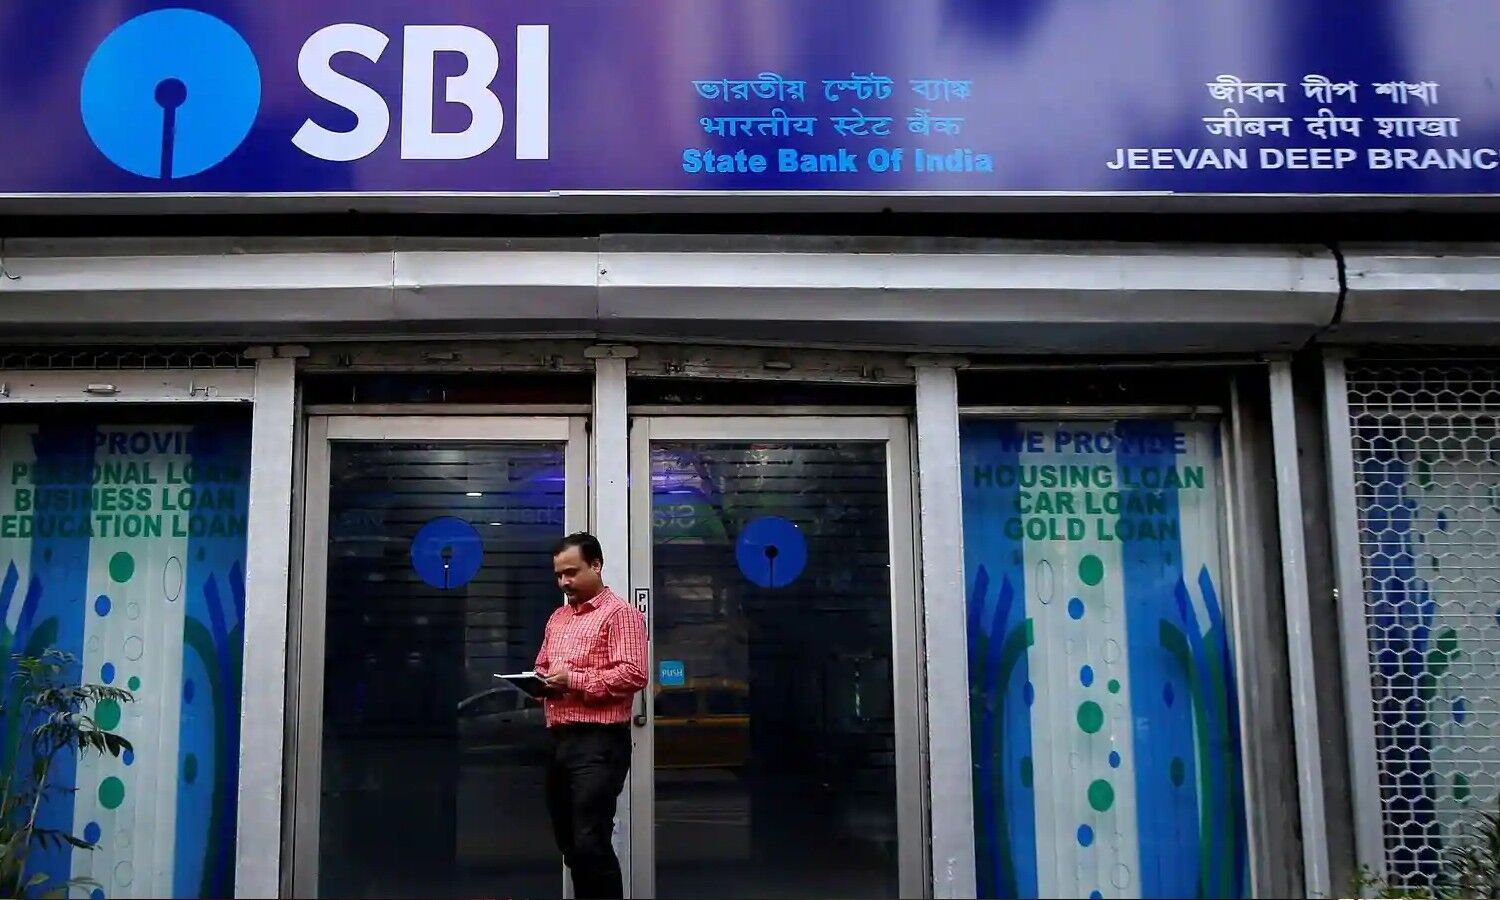 SBI Digital Banking Services: All the work of the bank became easy for the customers of State Bank of India, take advantage like this